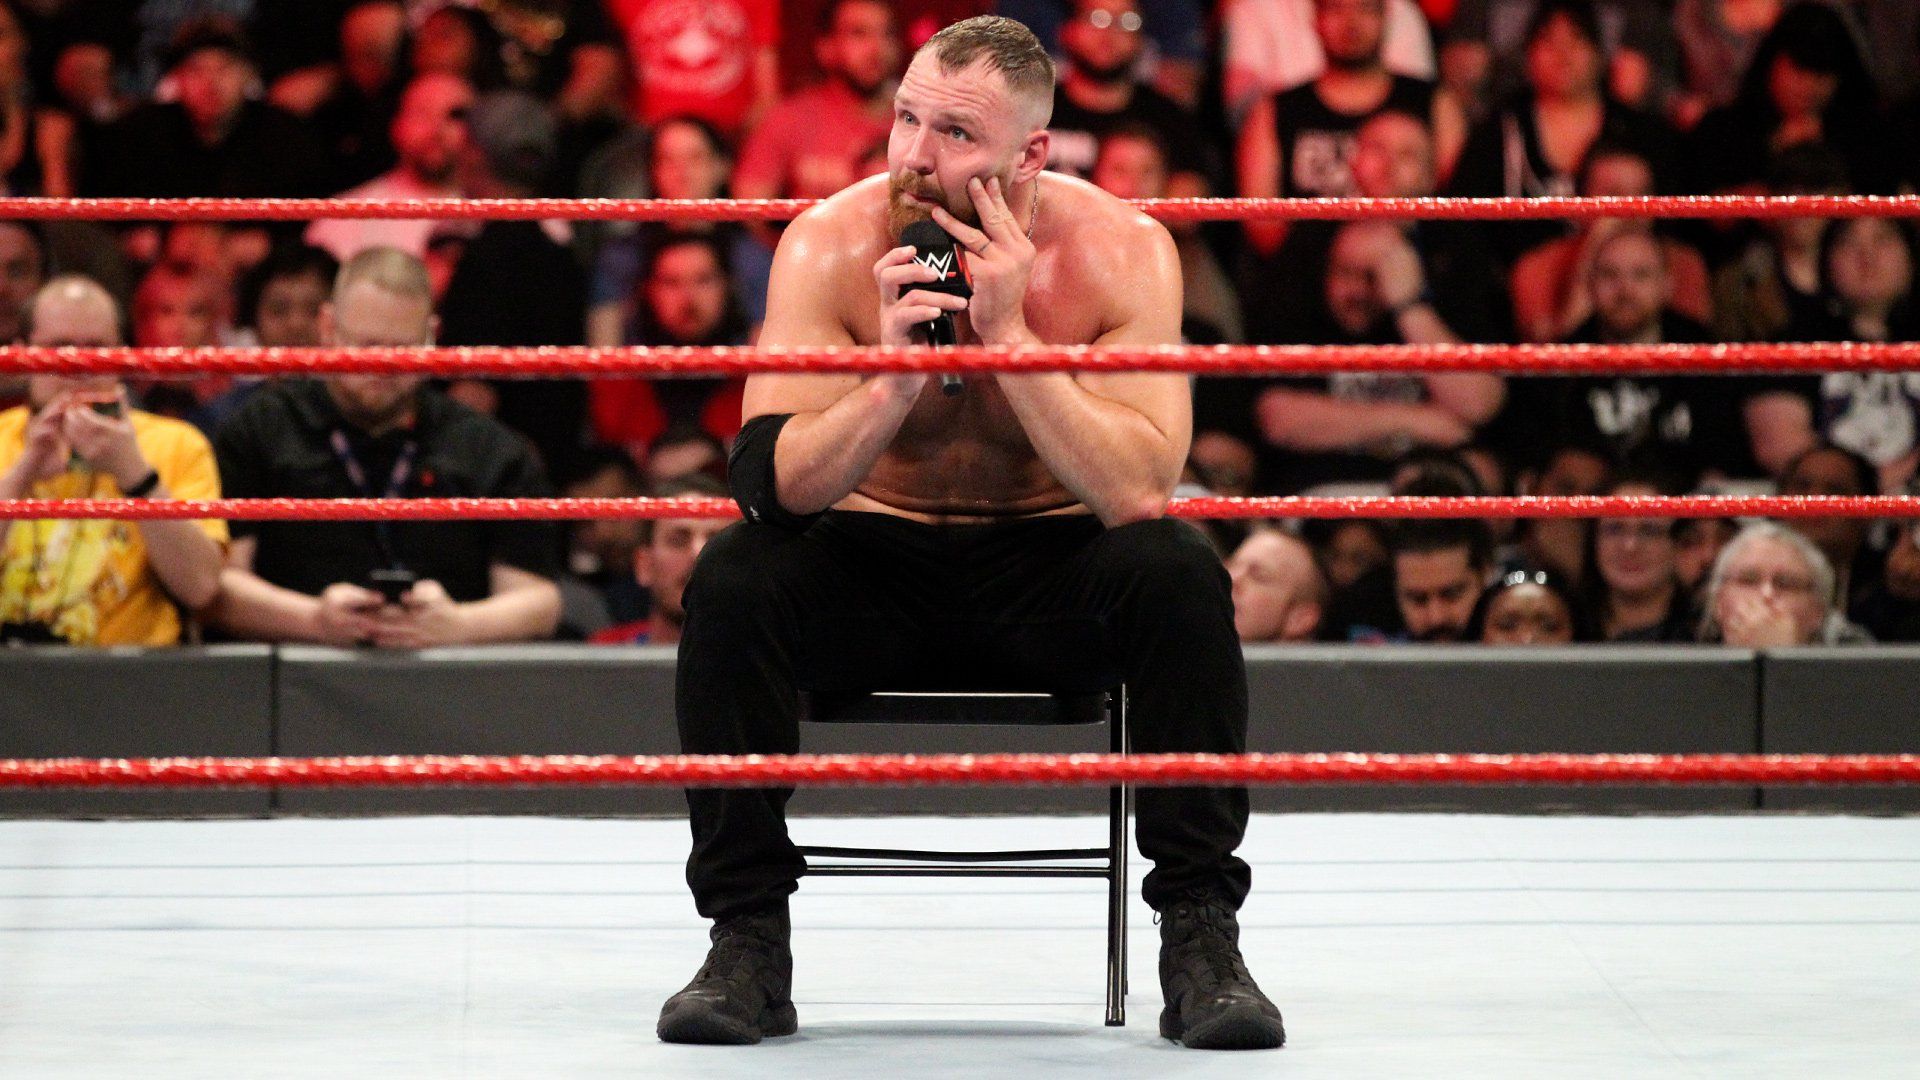 Dean Ambrose to leave WWE after WrestleMania 35